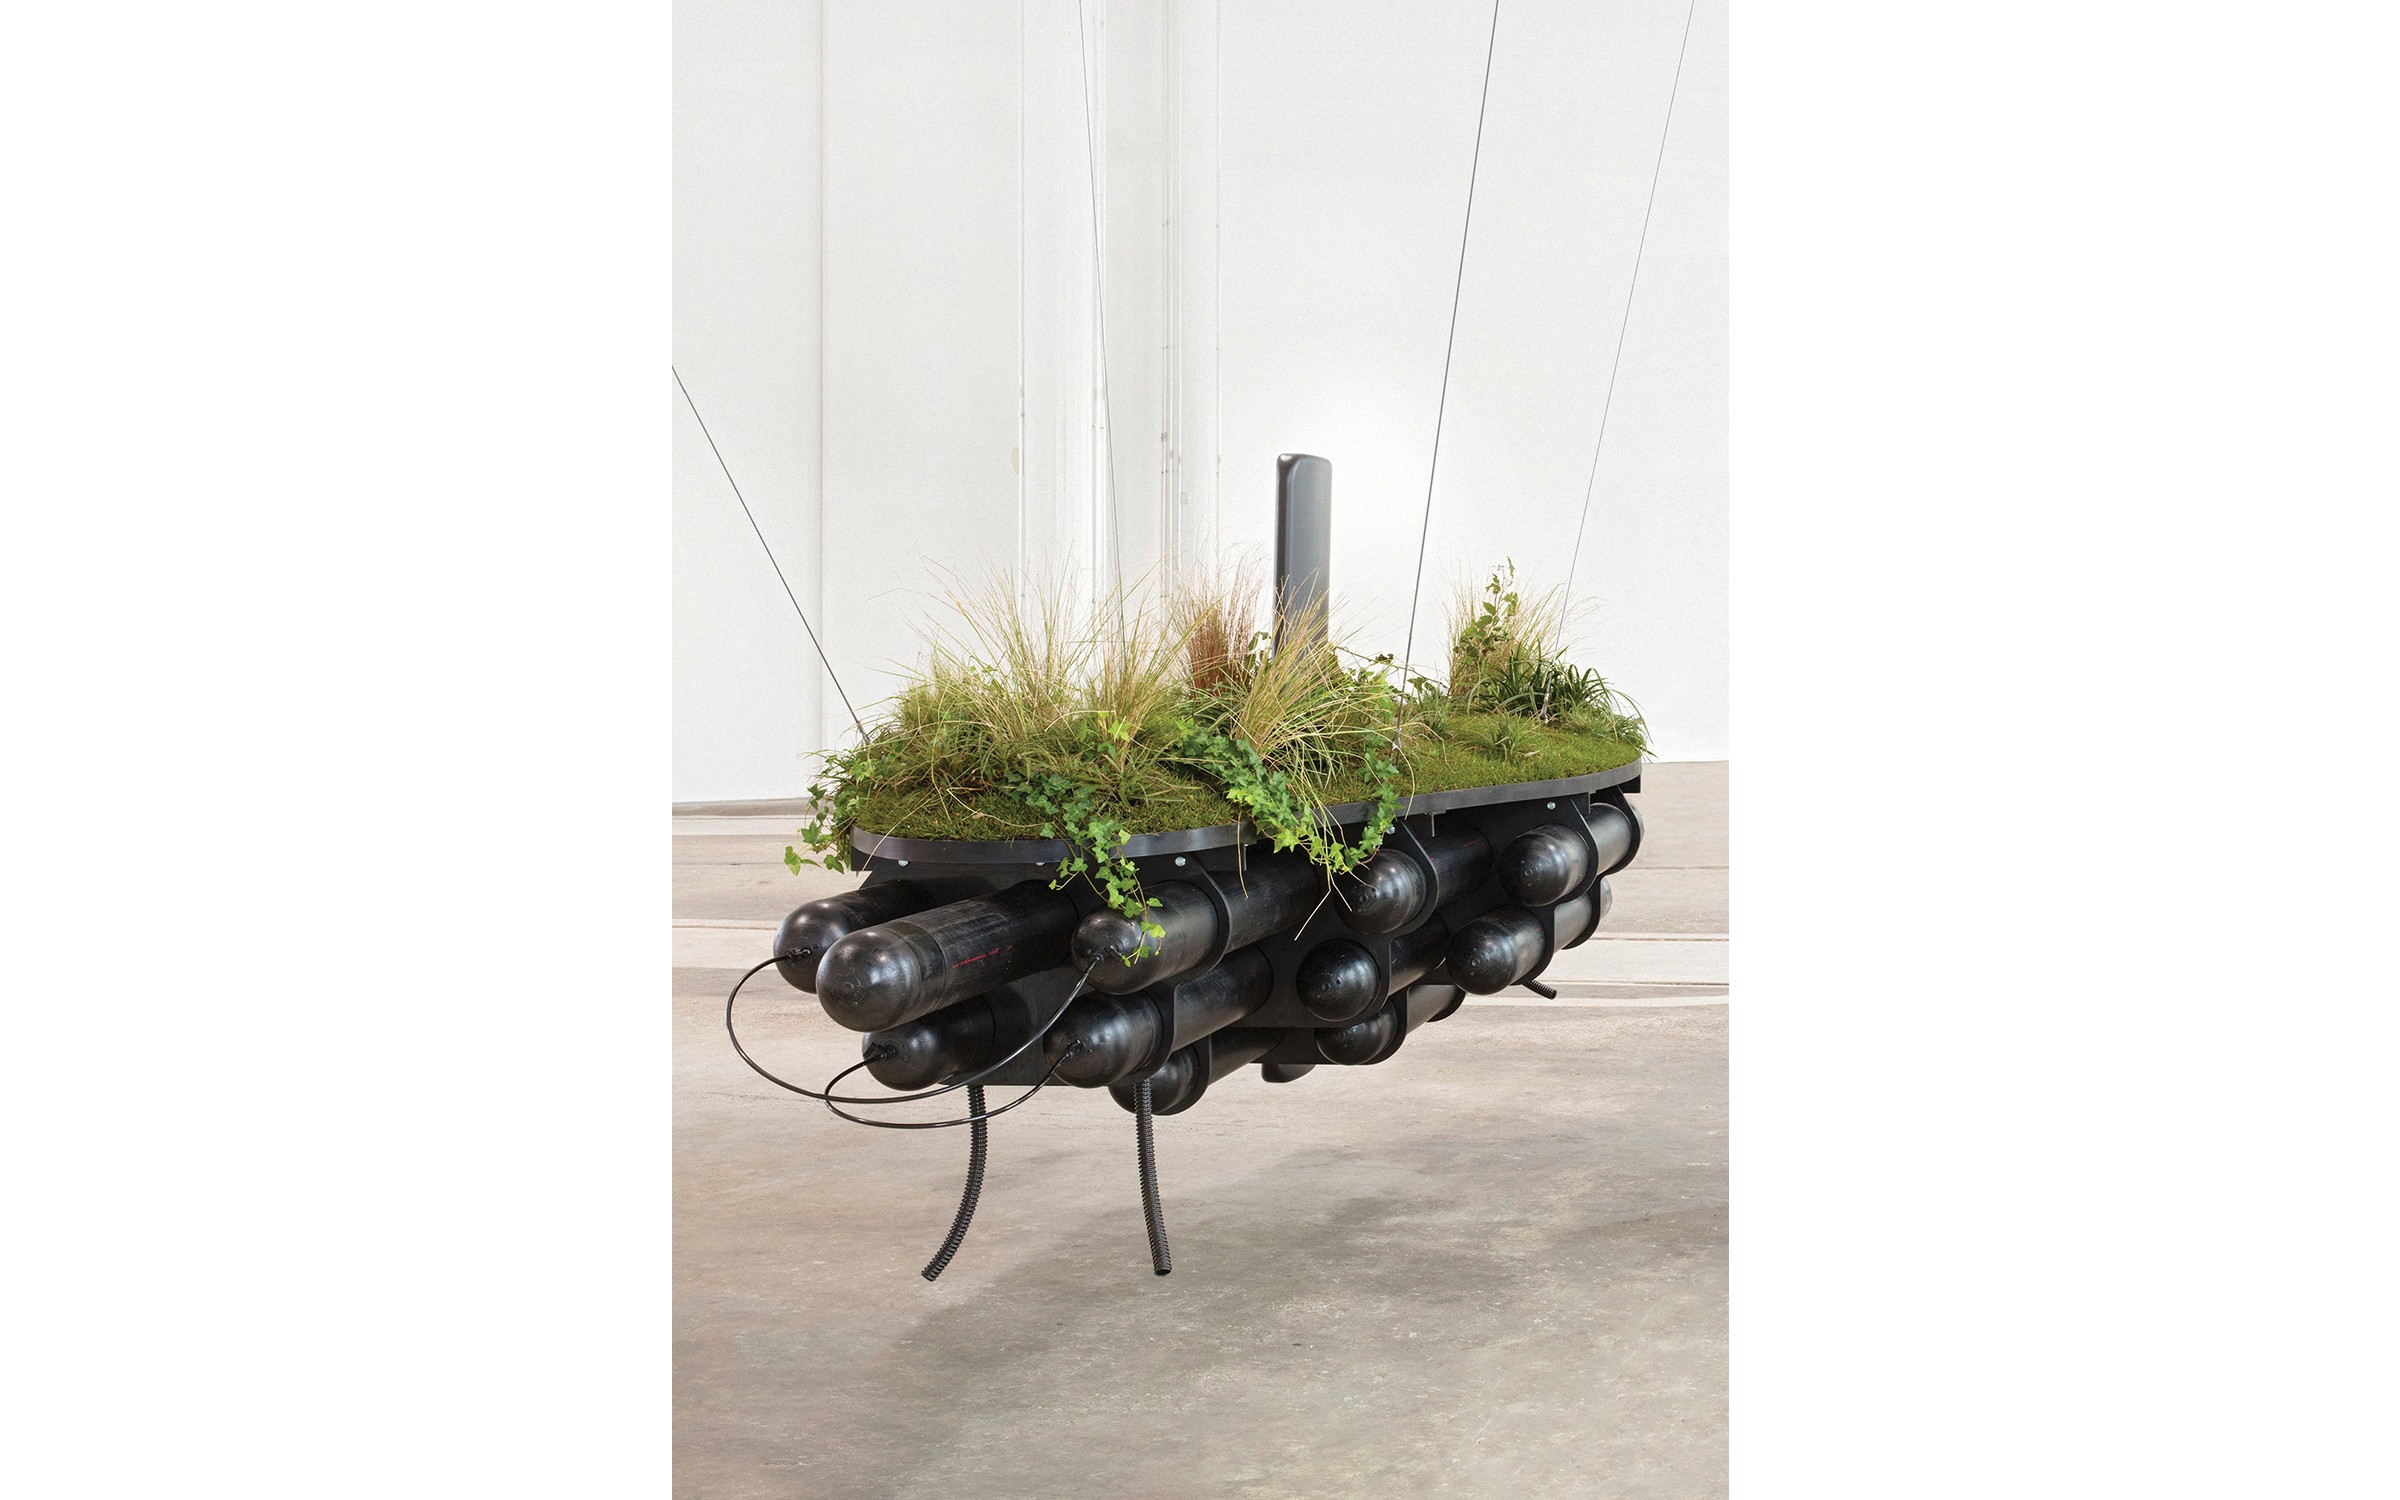 Simon Starling, Project for a Floating Garden (After Little Sparta), 2011, 2015.jpg